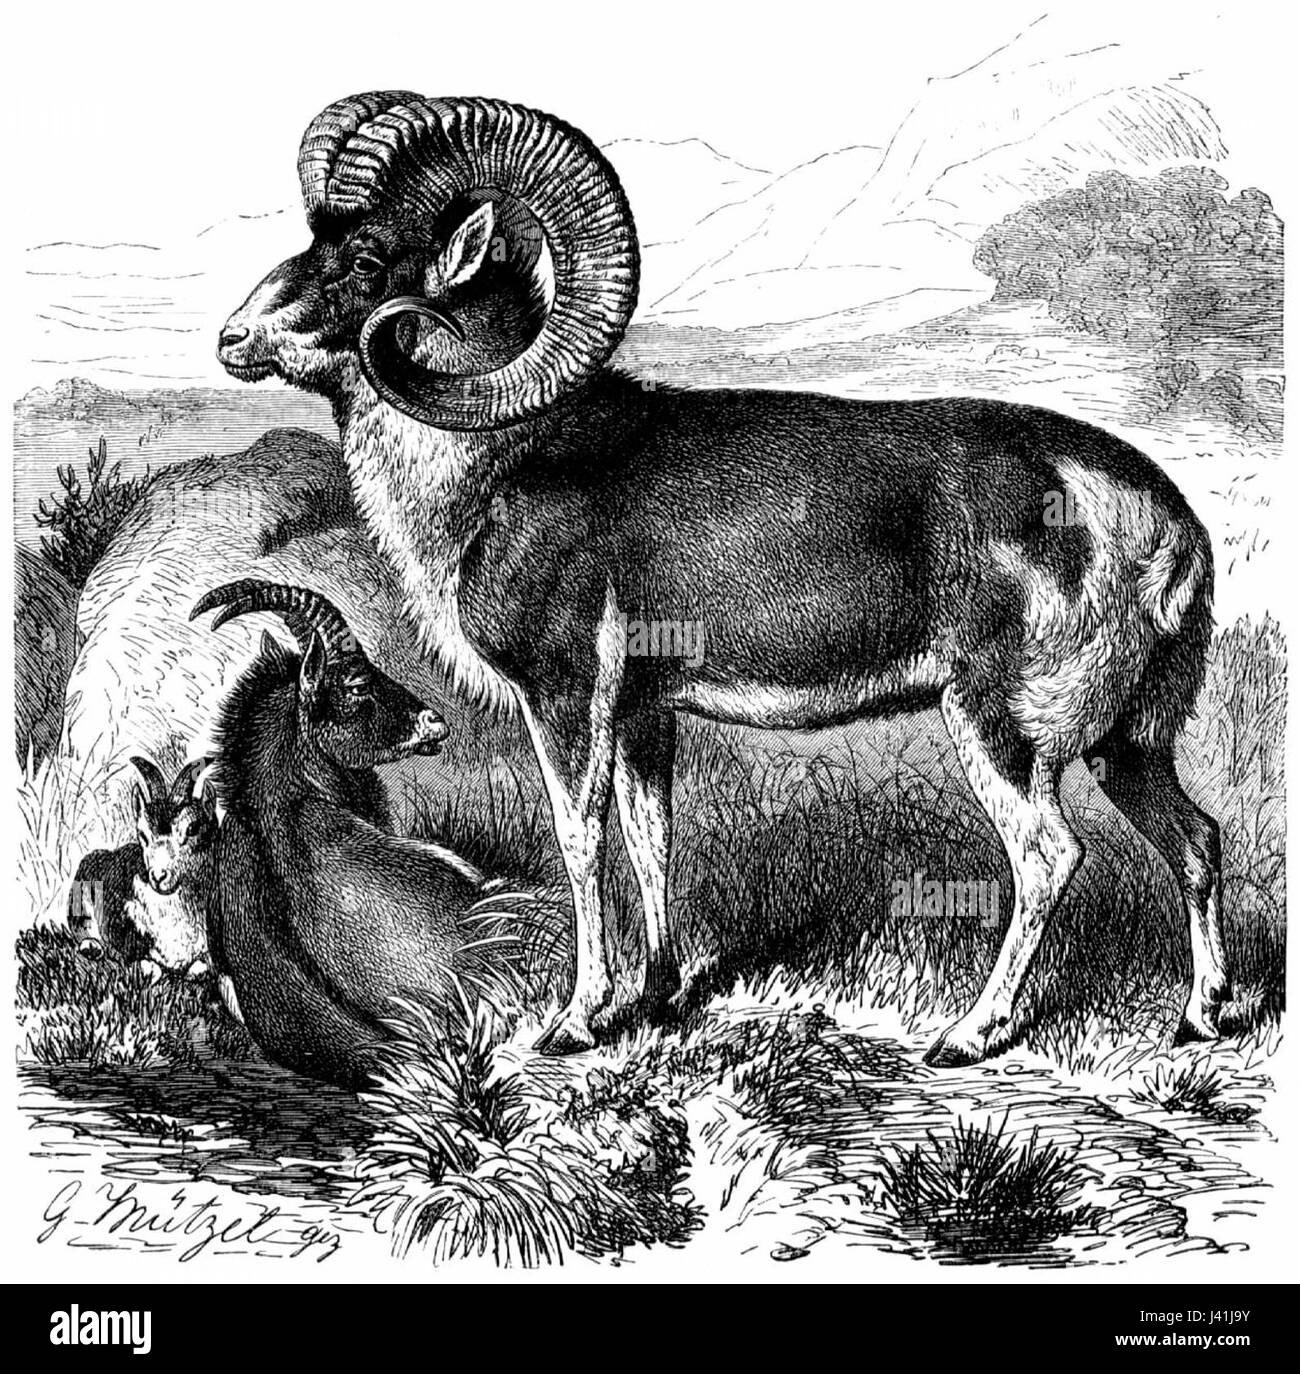 Marco polo sheep line drawing Stock Photo